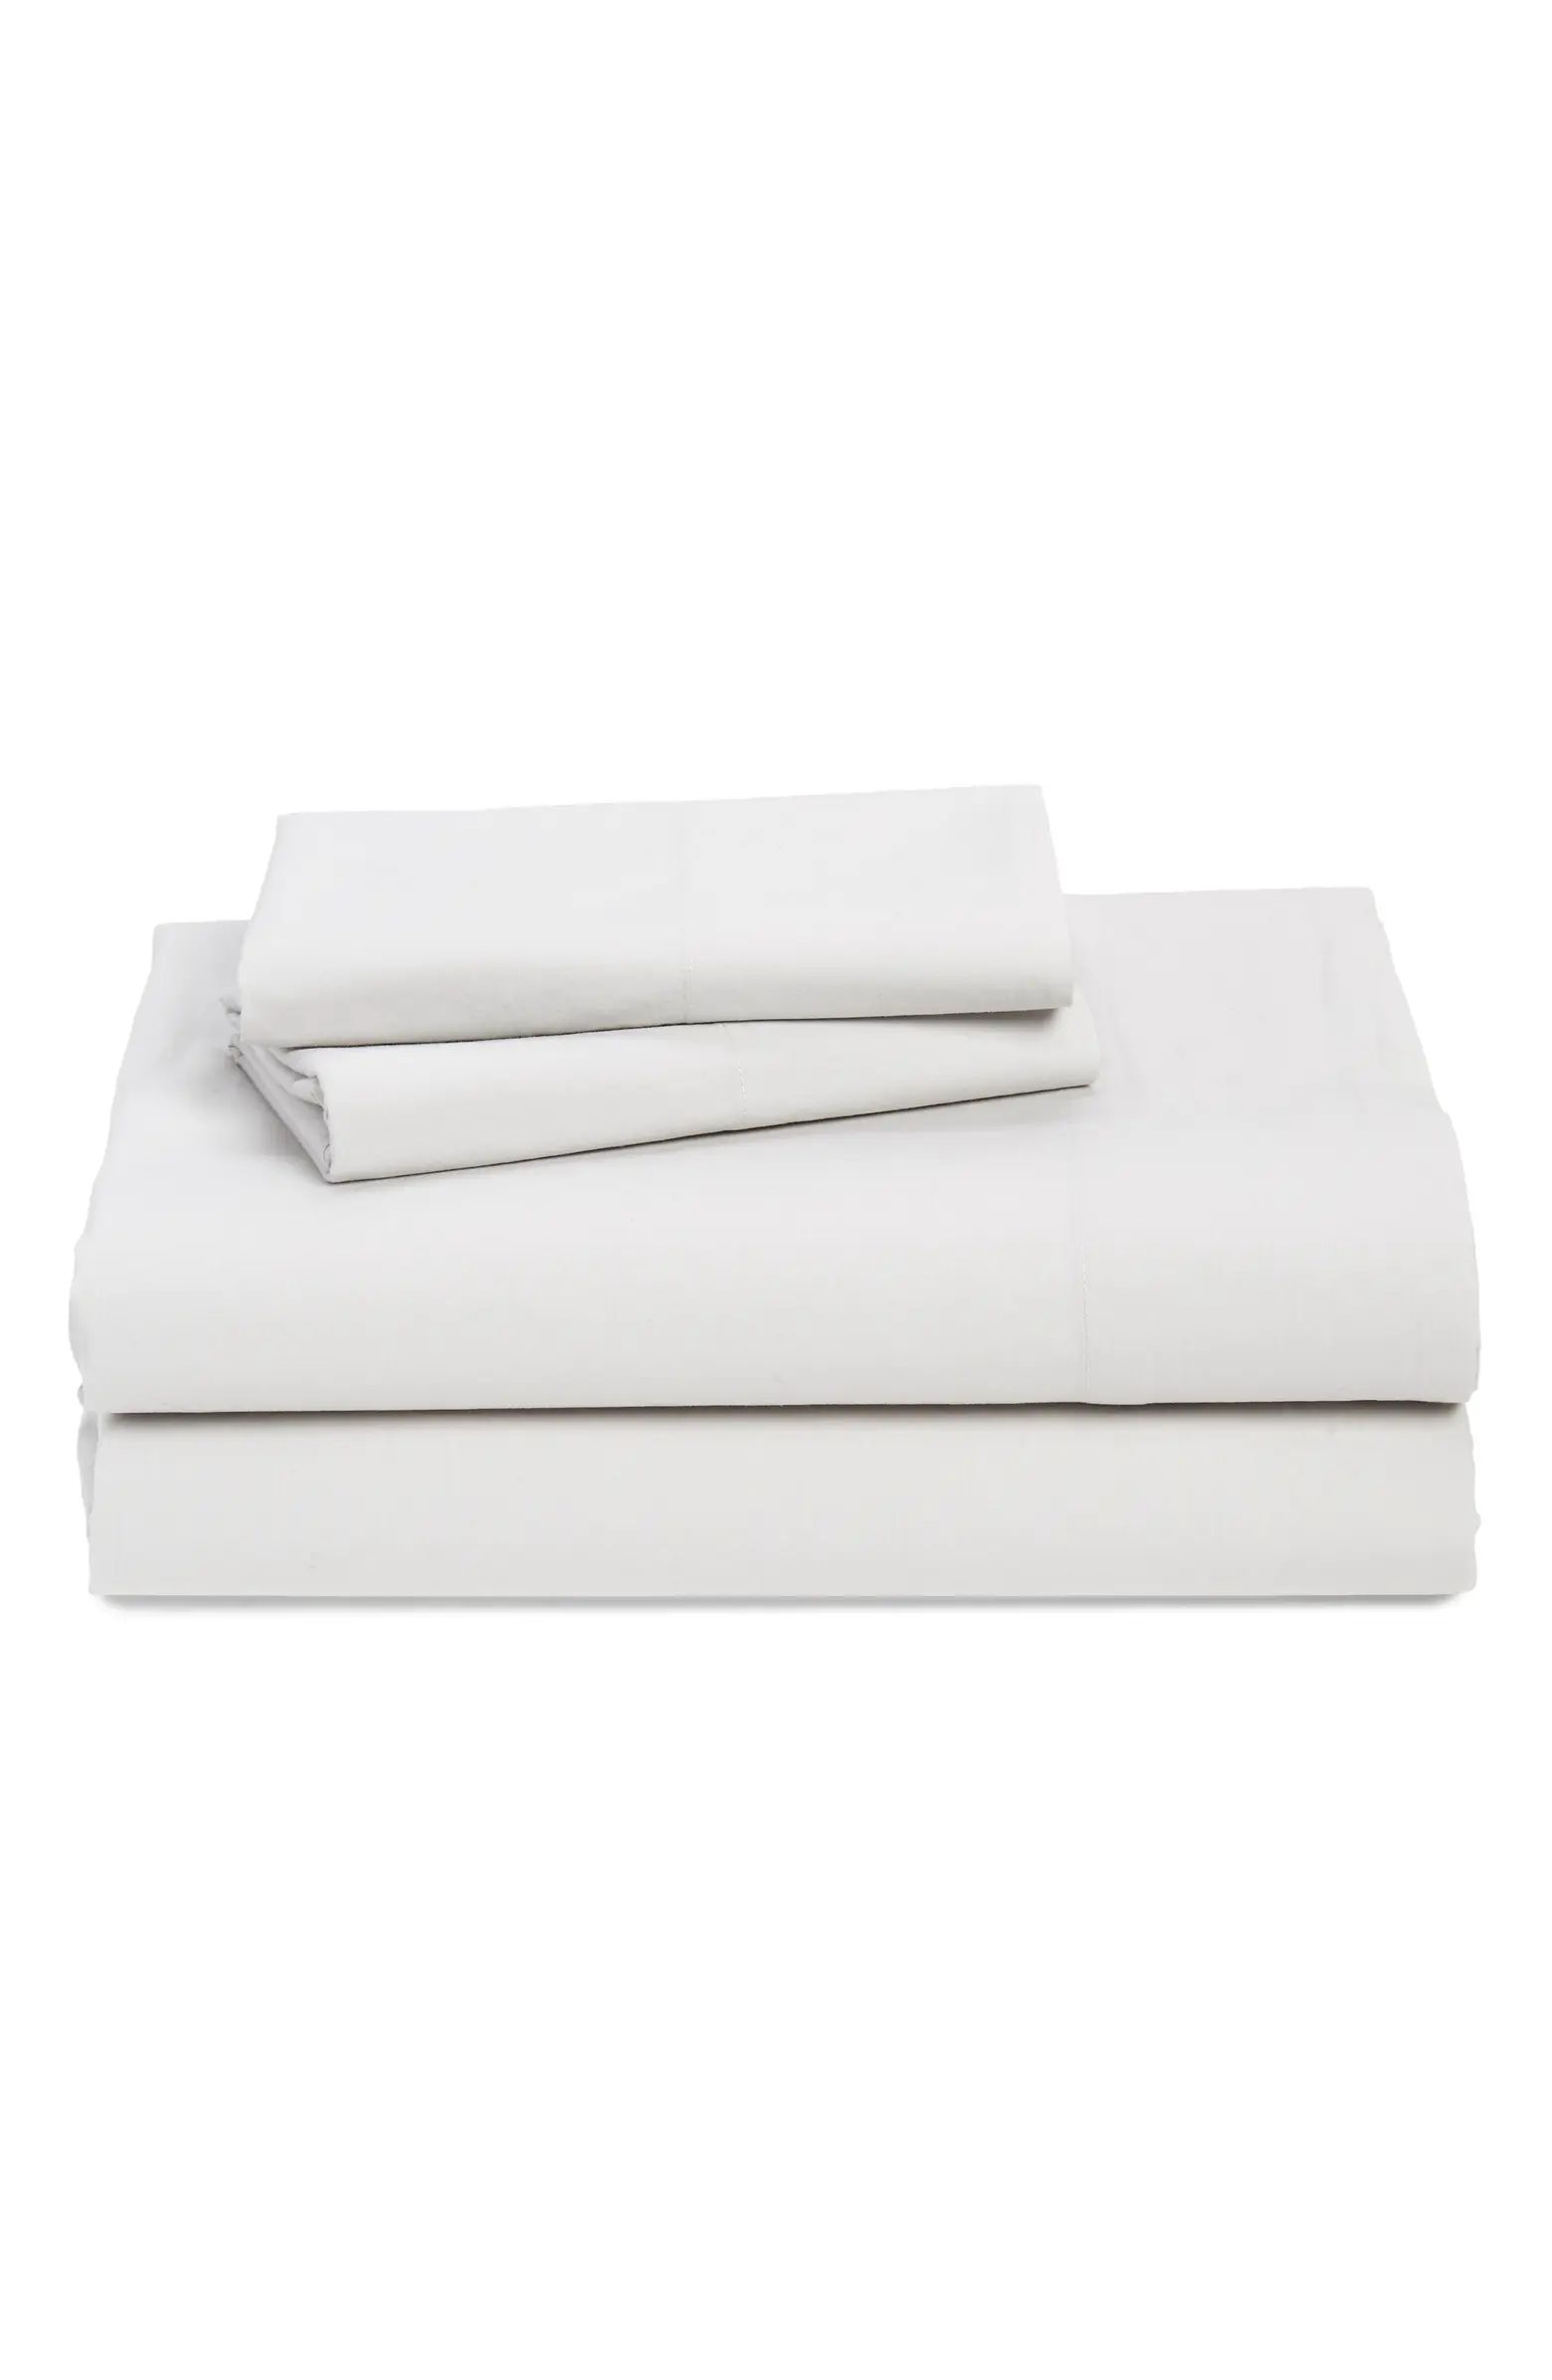 200 Thread Count Cotton Percale Sheet Set | Nordstrom